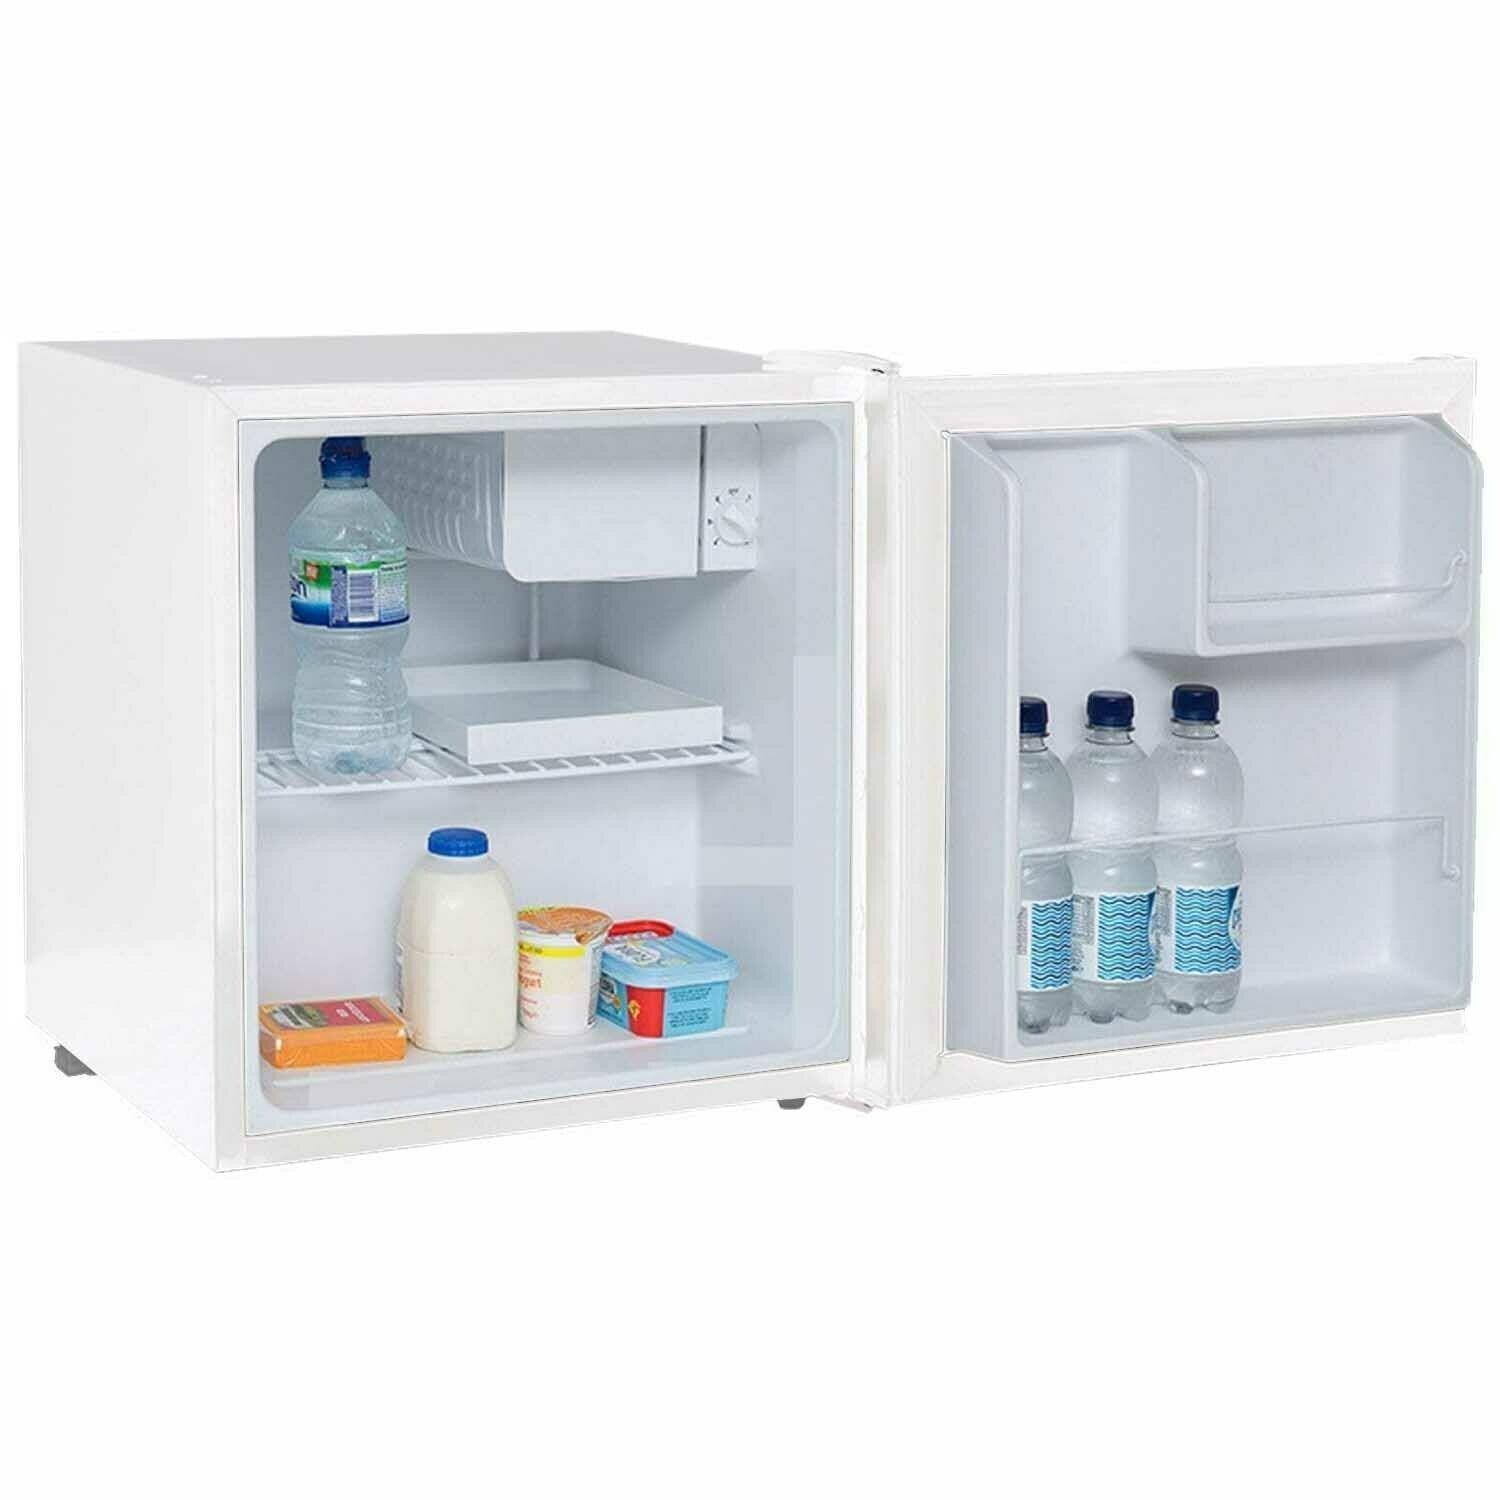 49L Mini Fridge With Ice Box In White, Beer & Drinks Cooler TT01WH